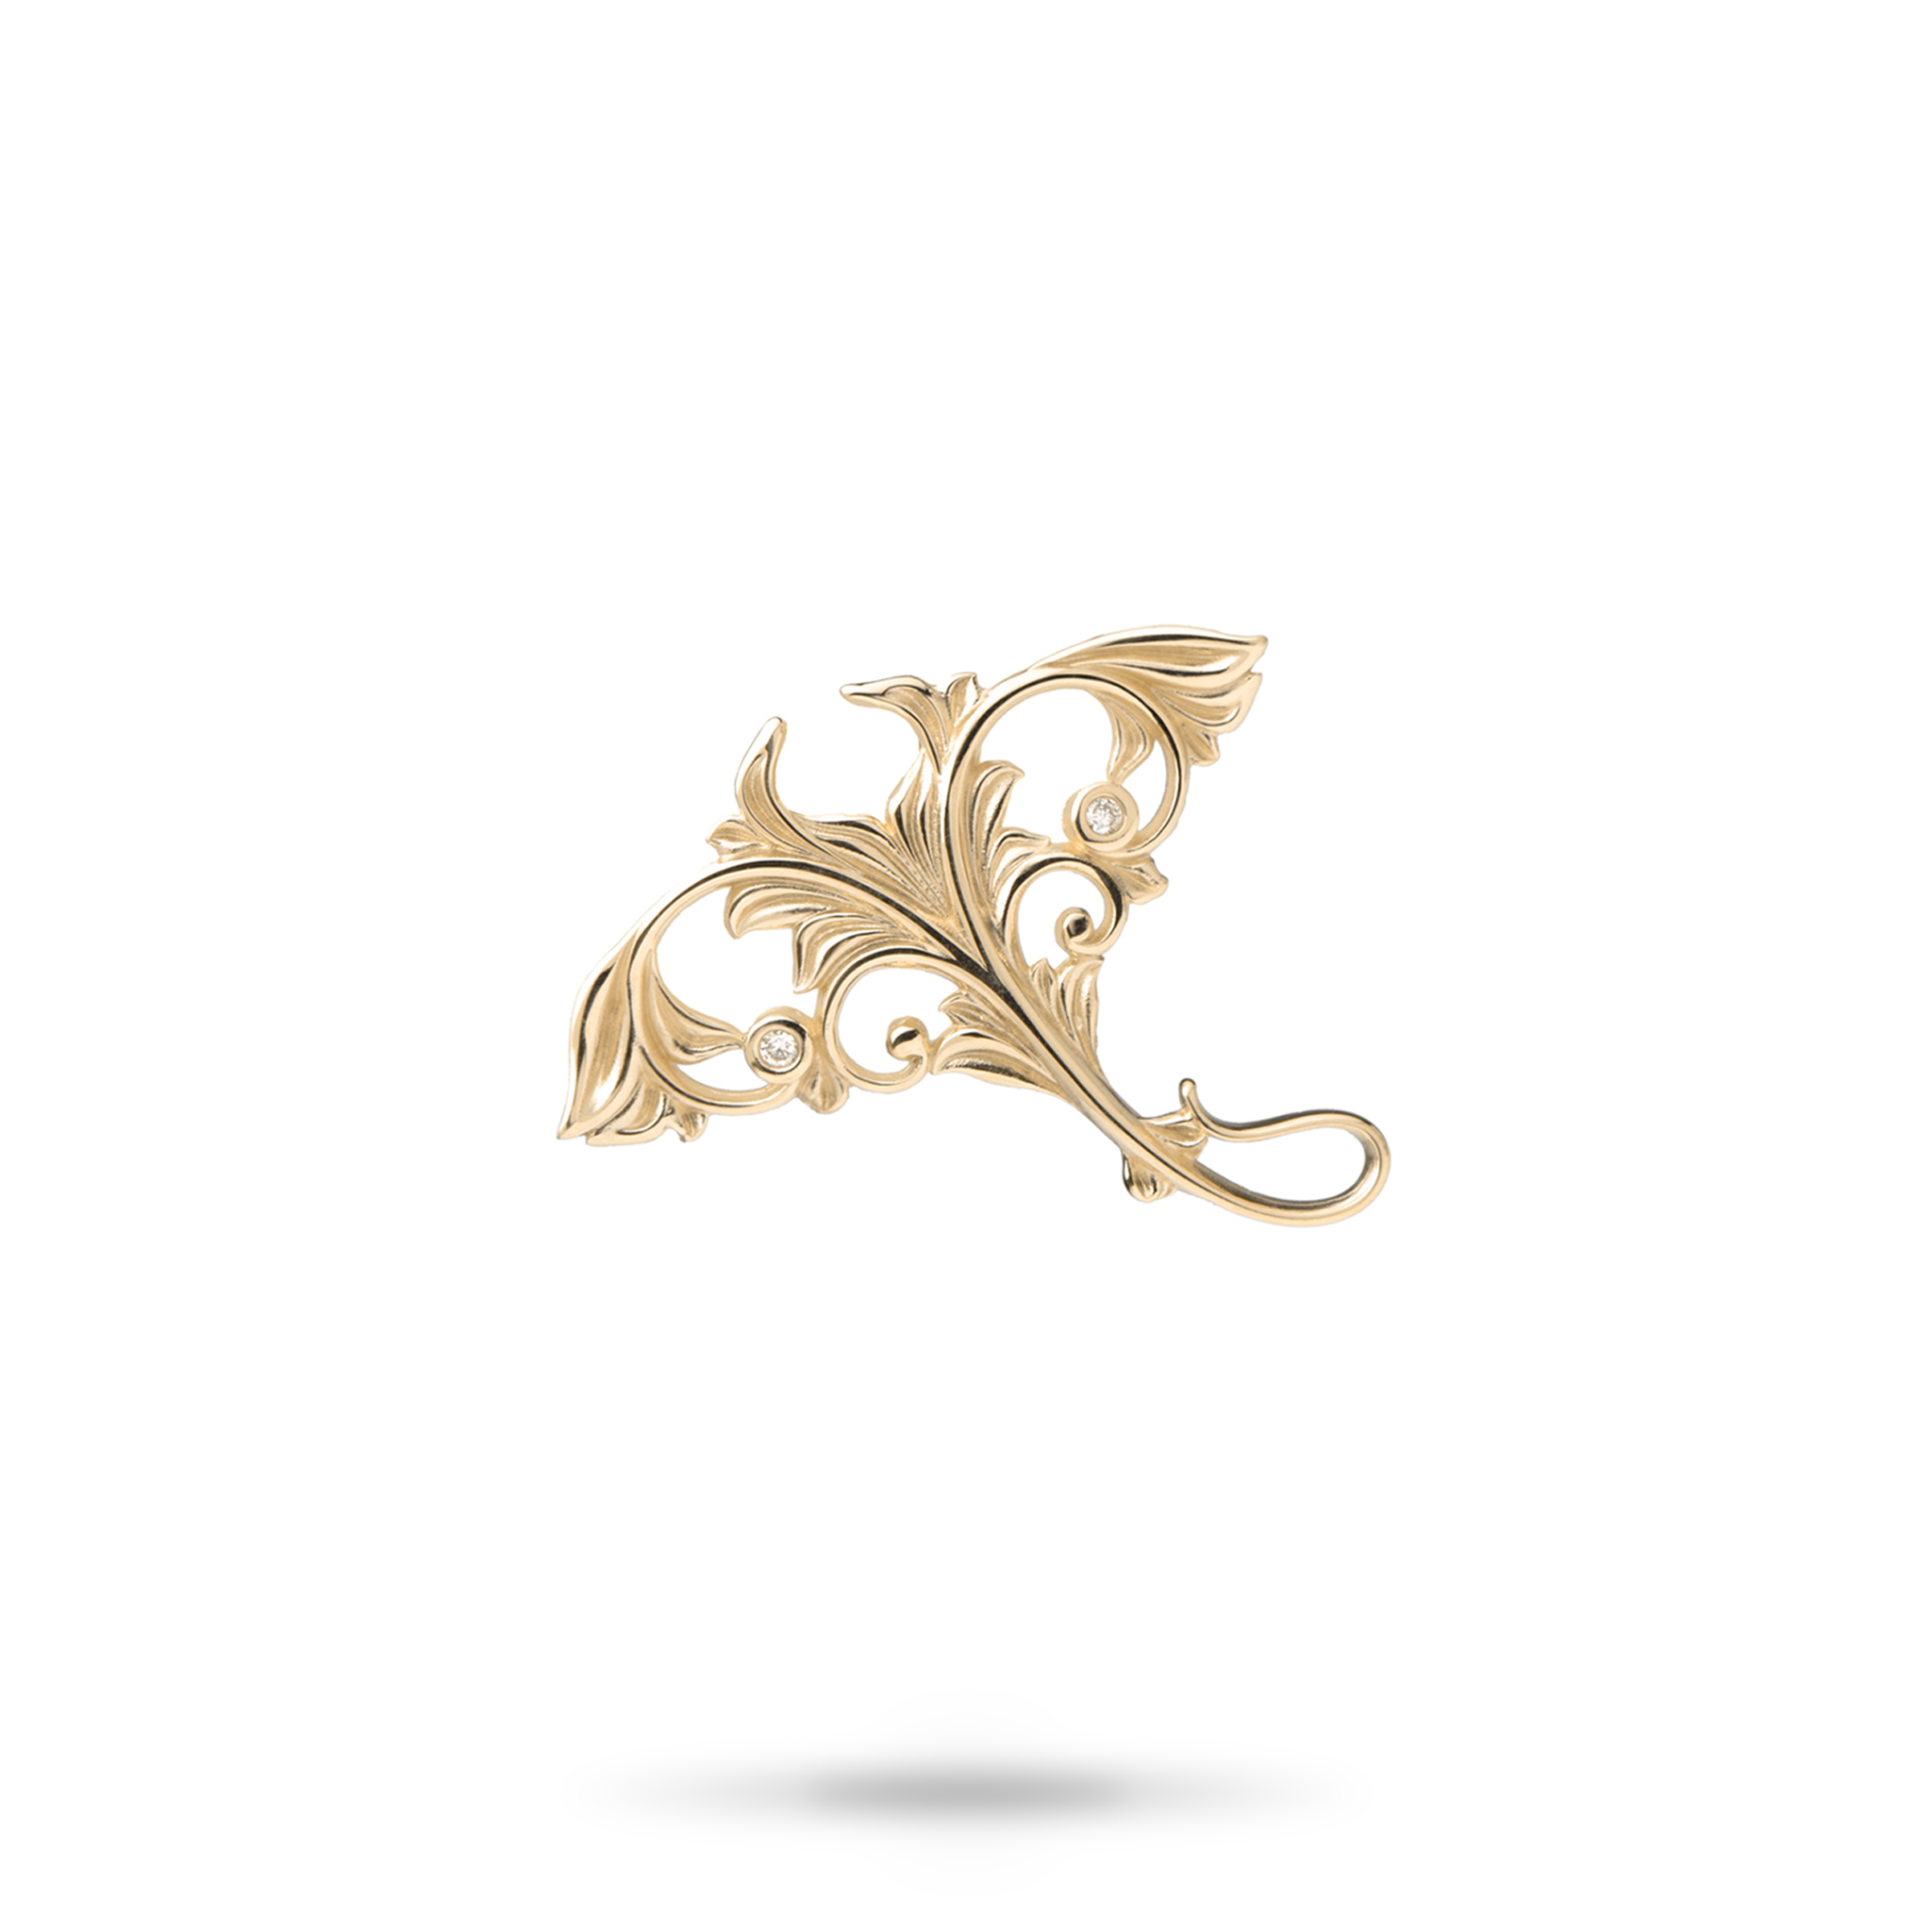 Living Heirloom Manta Ray Pendant in Gold with Diamonds - 23mm